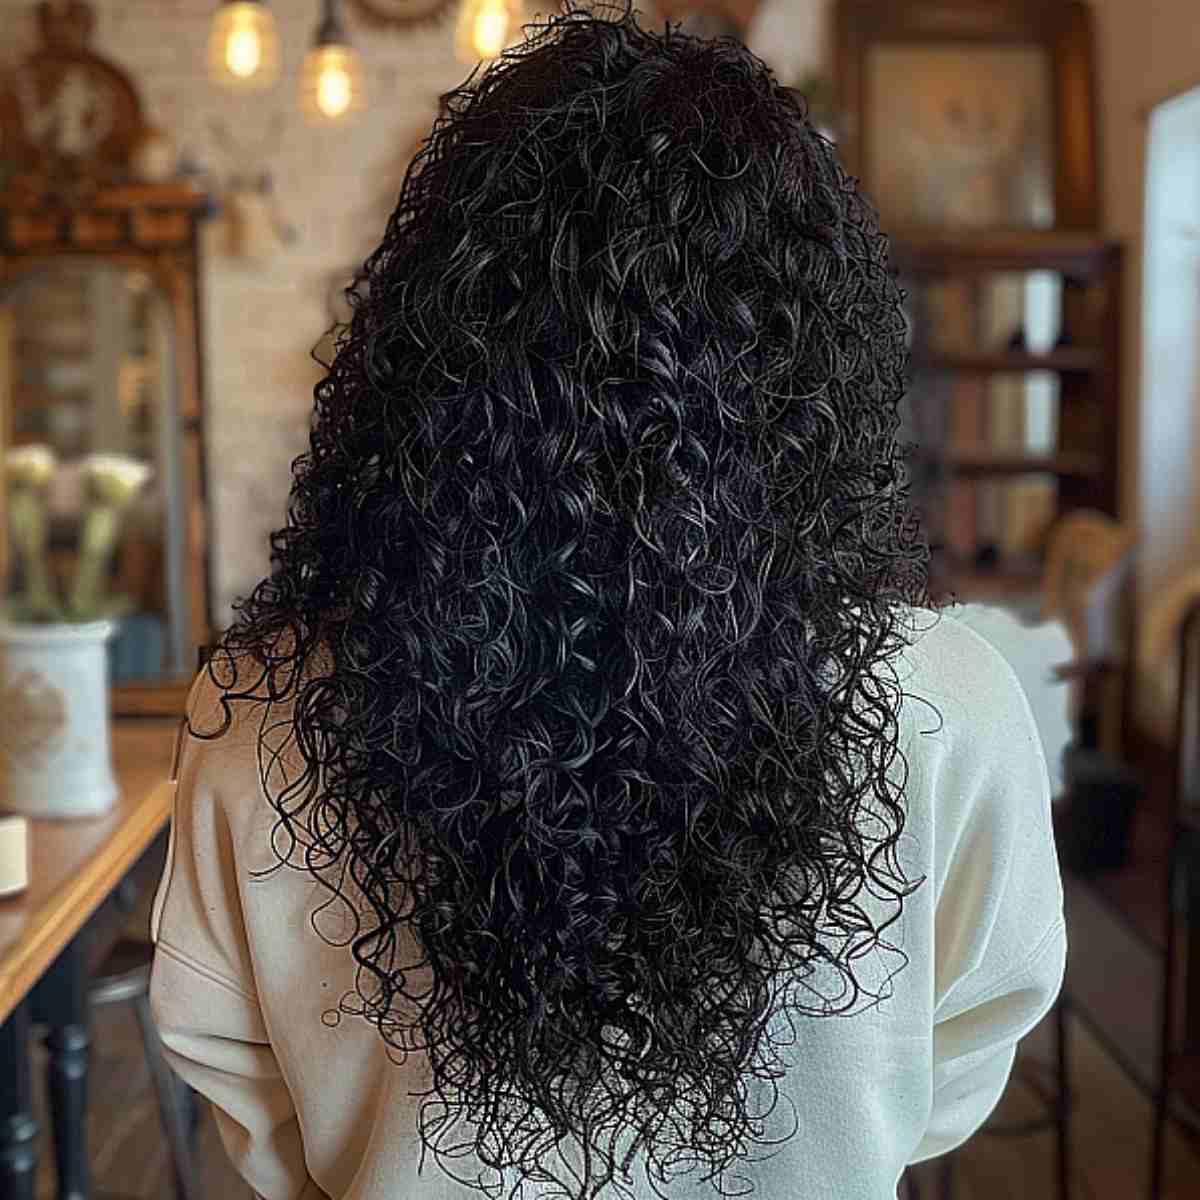 Modern v-shape layers for naturally curly hair